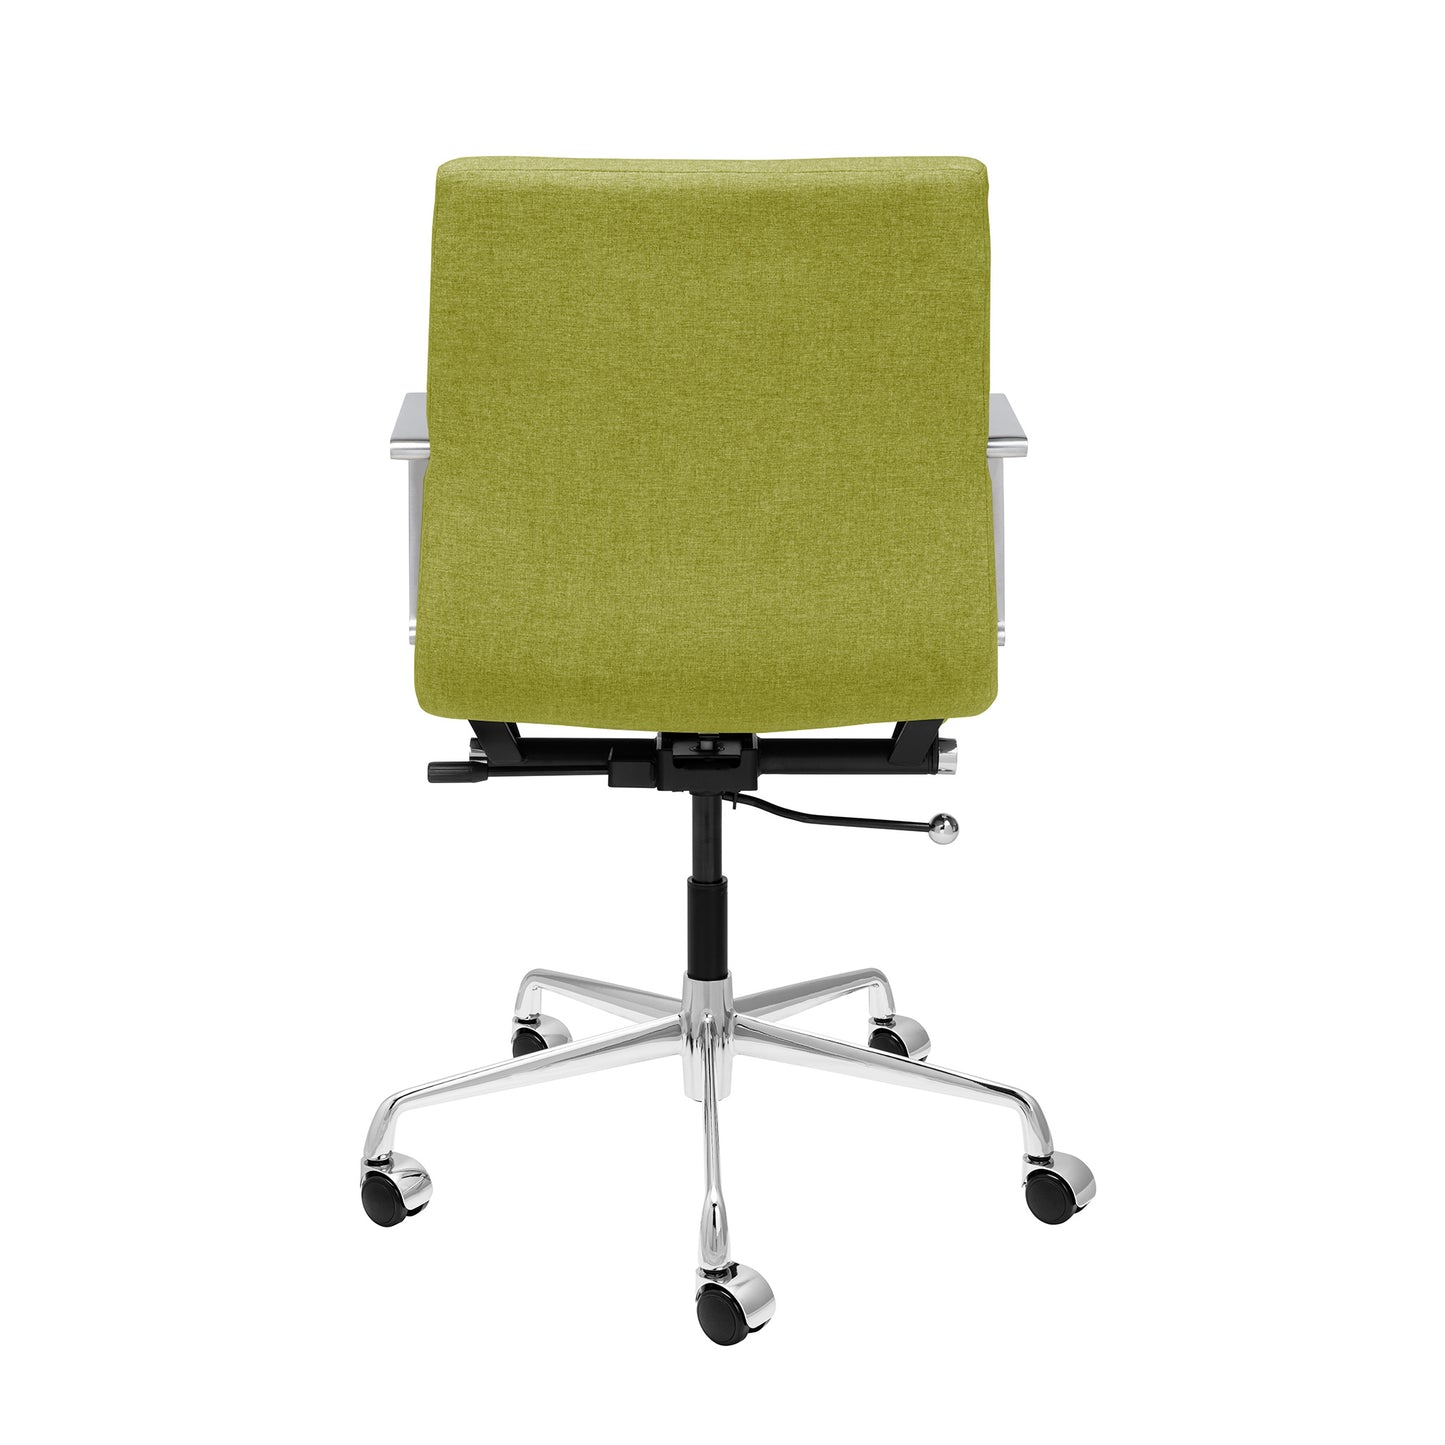 SOHO II Ribbed Management Chair (Green Fabric)